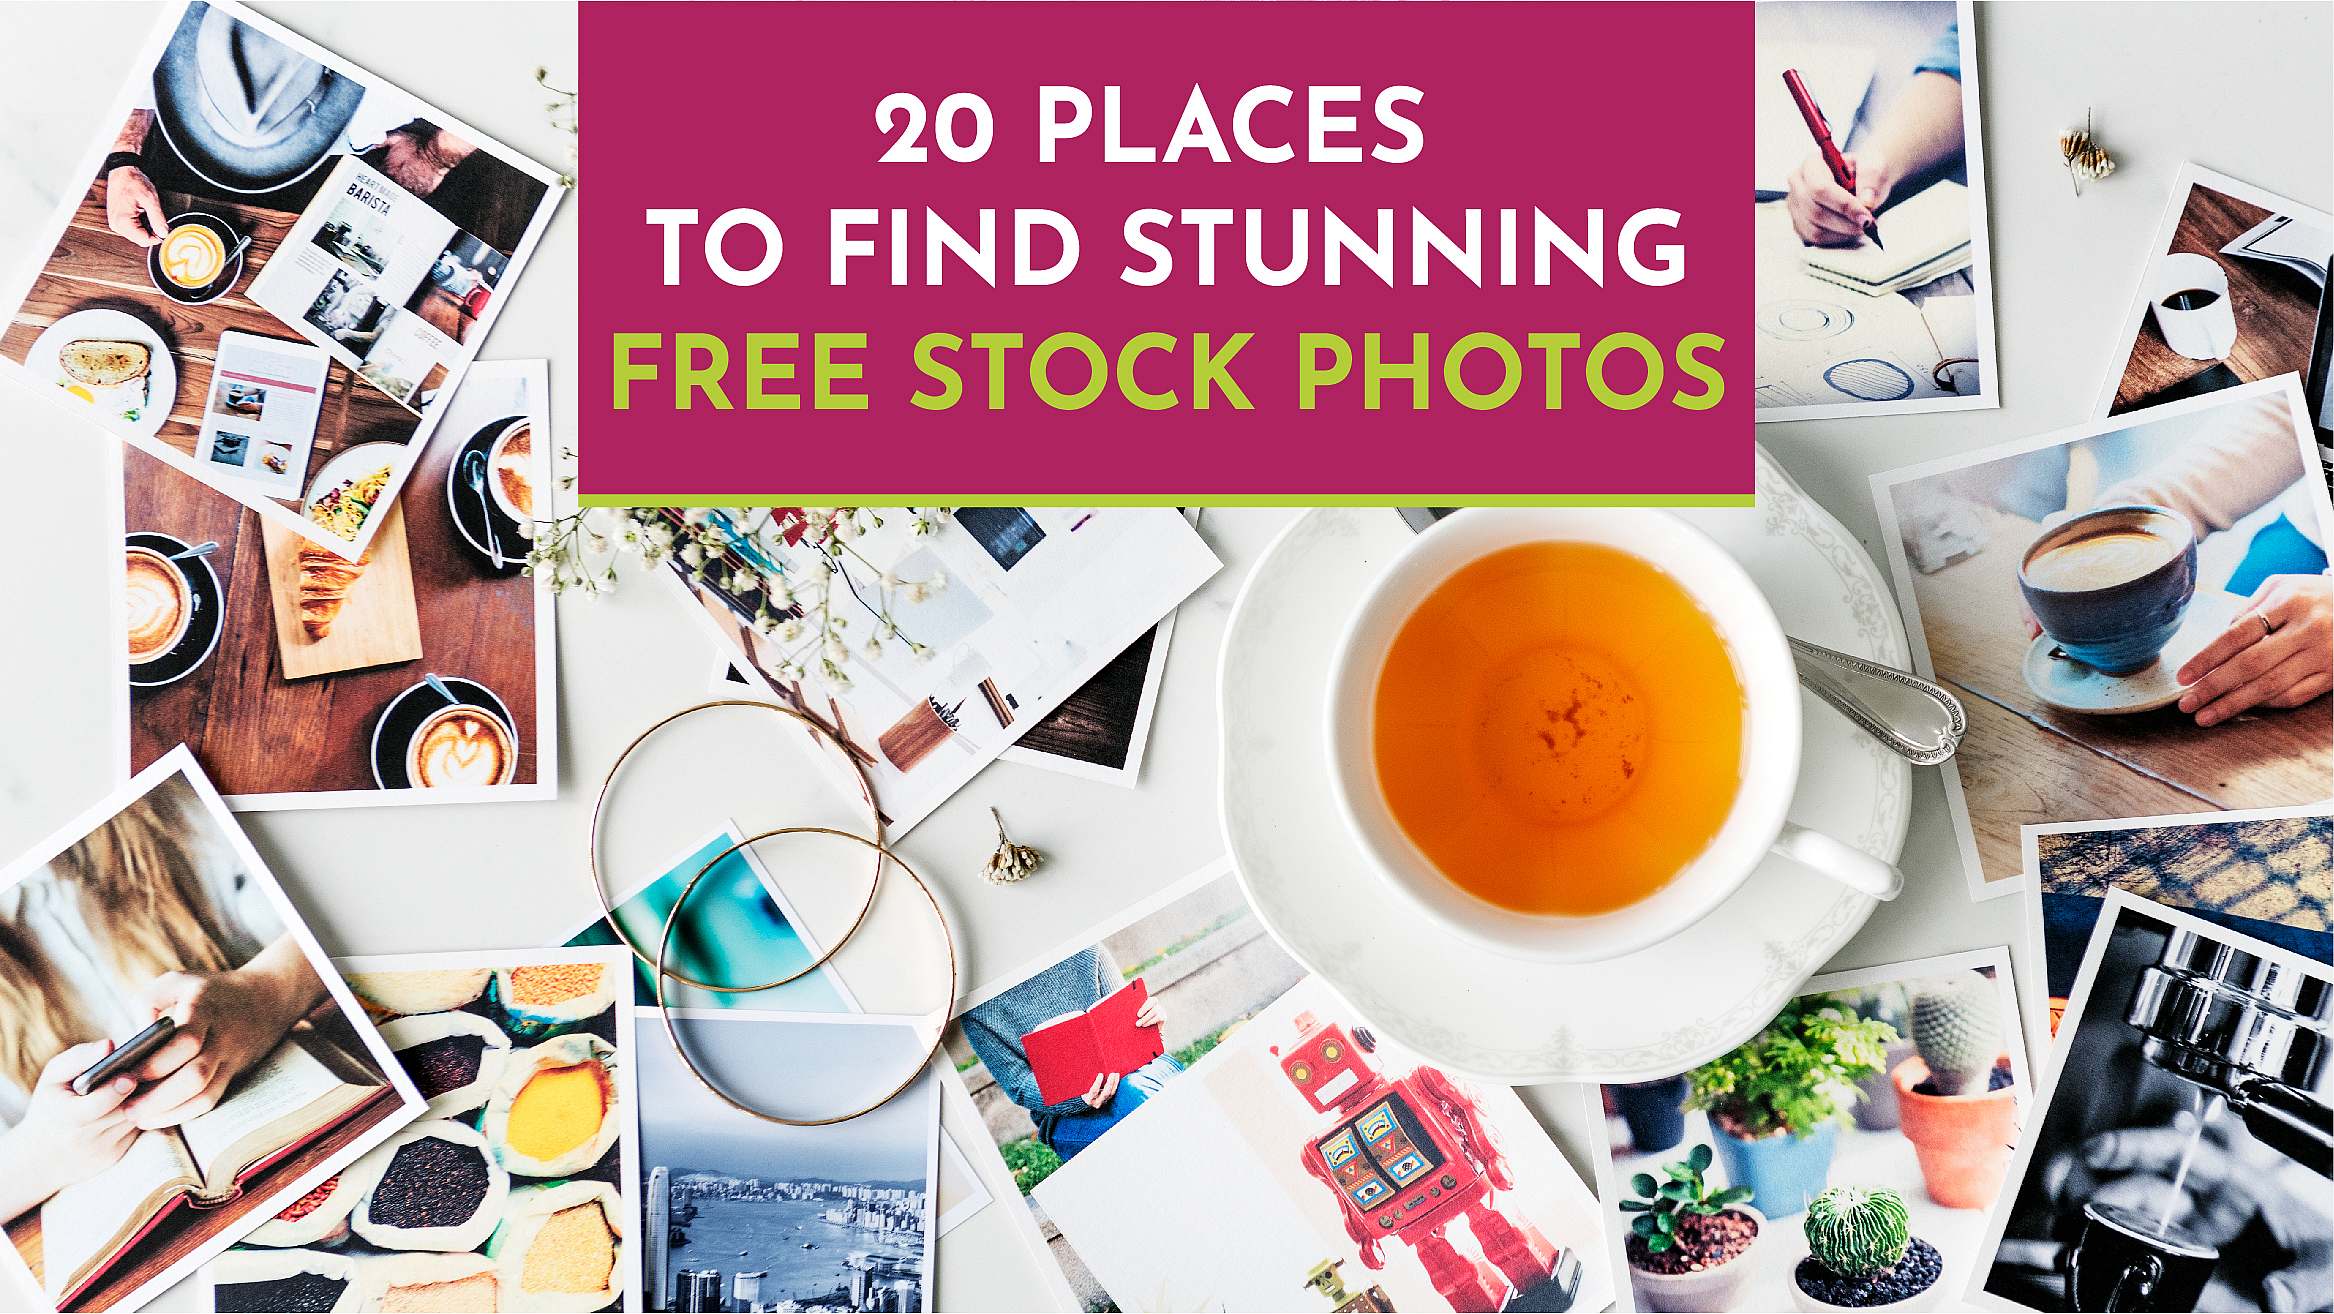 20 Places to Find Stunning Free Stock Photos